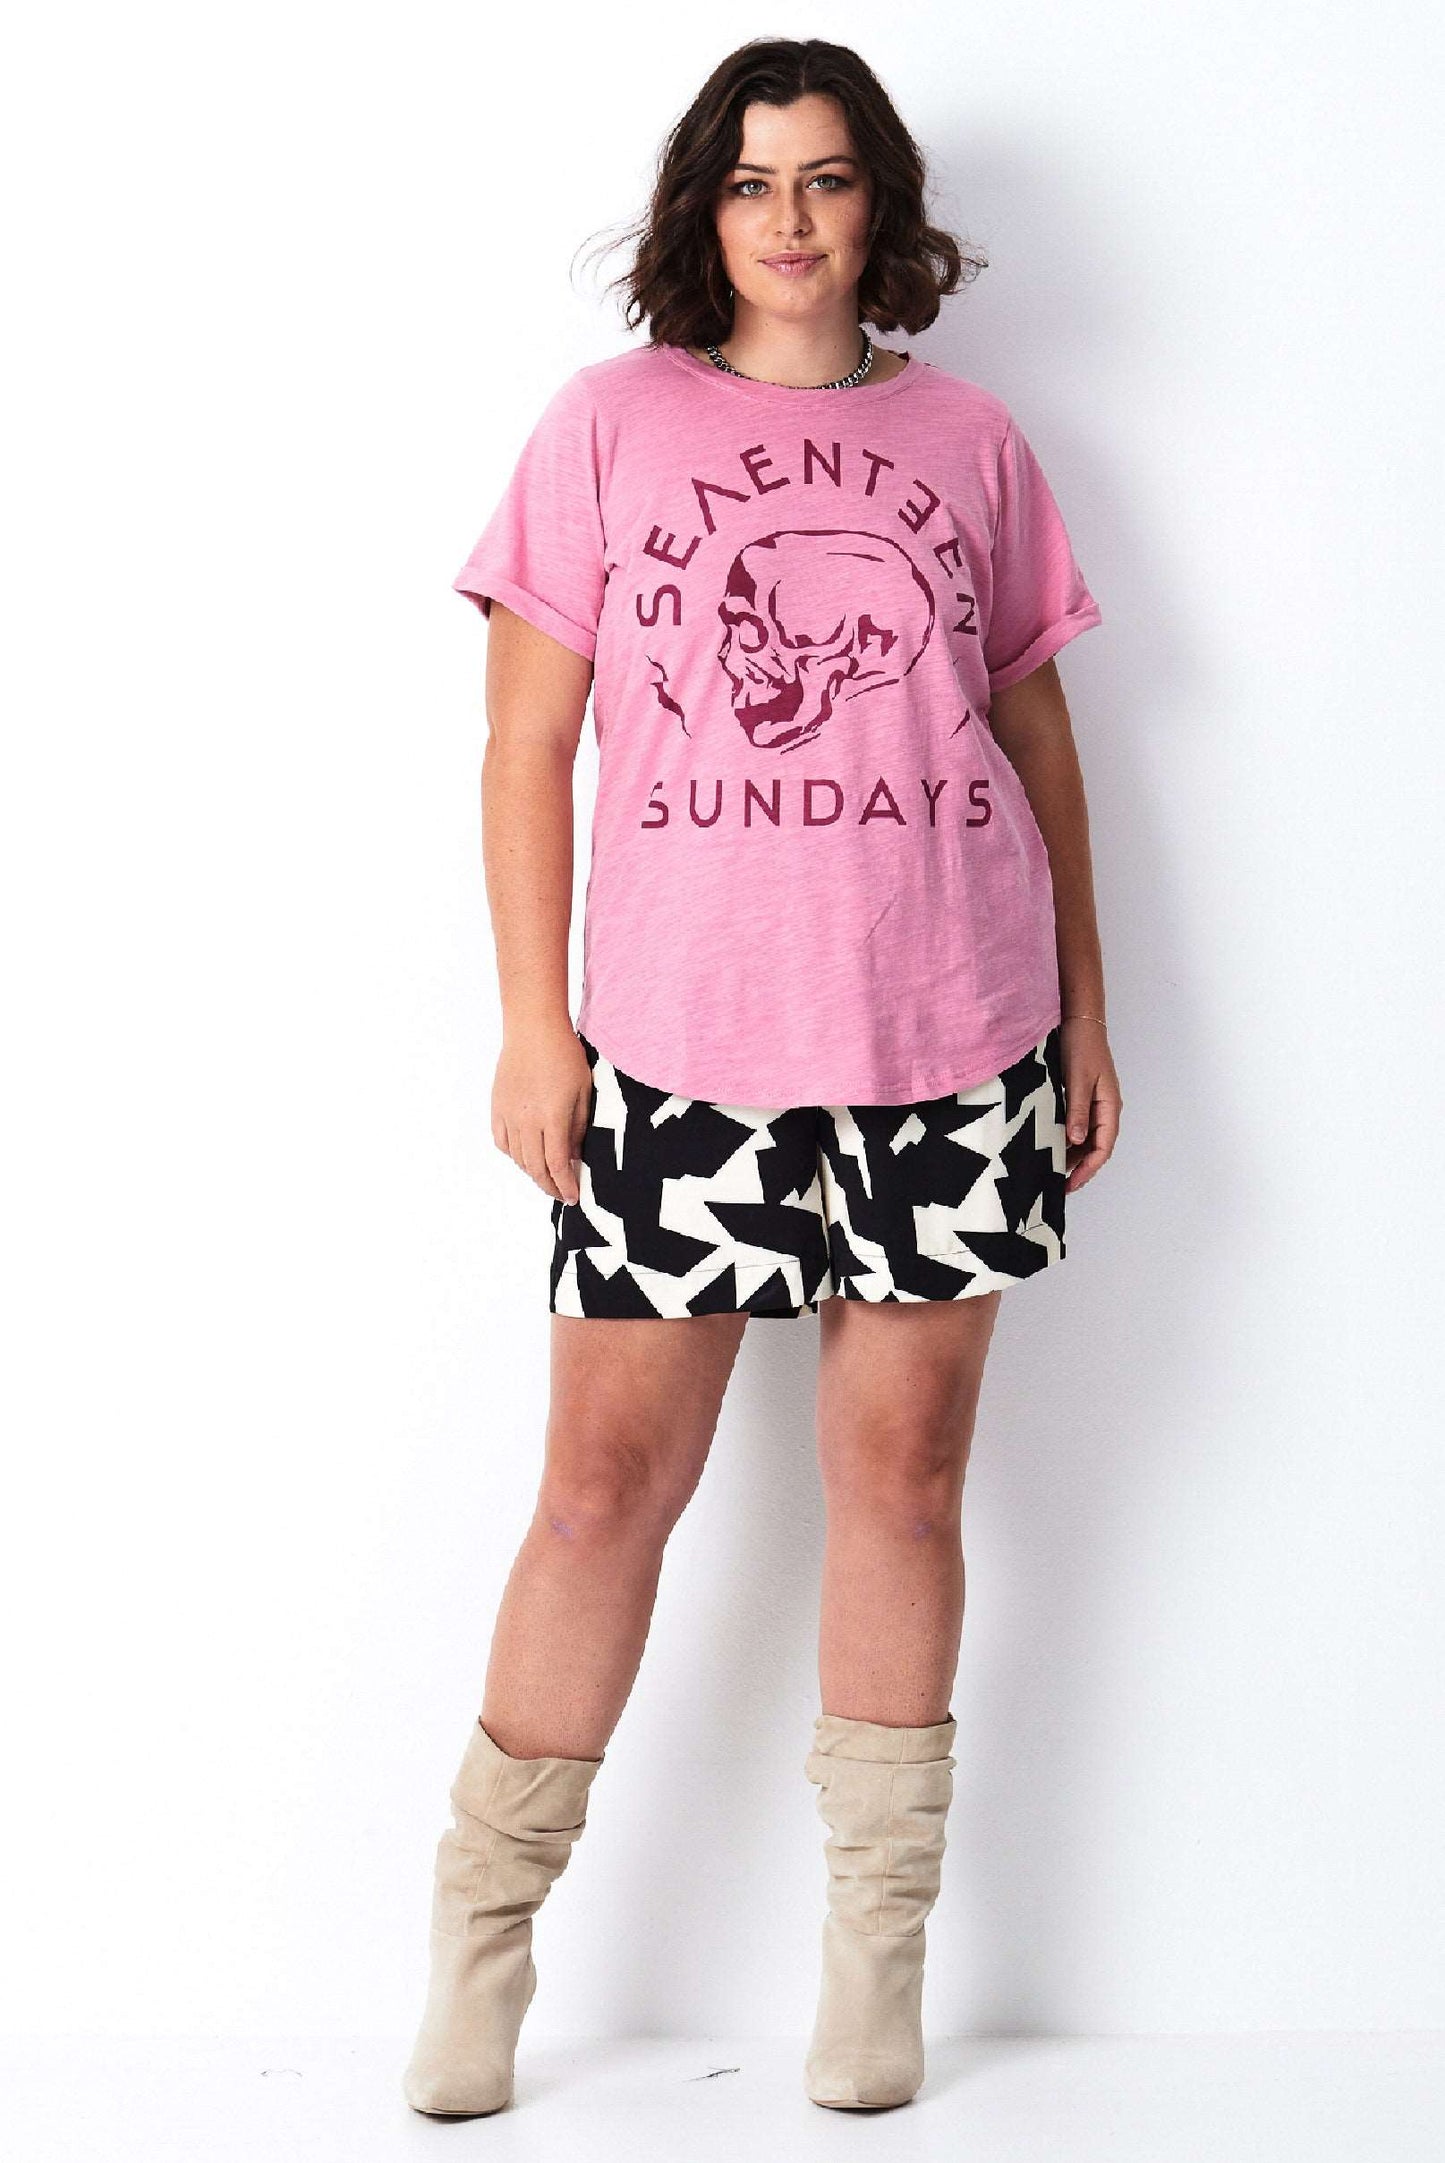 Model wears pink cotton plus size tee with print